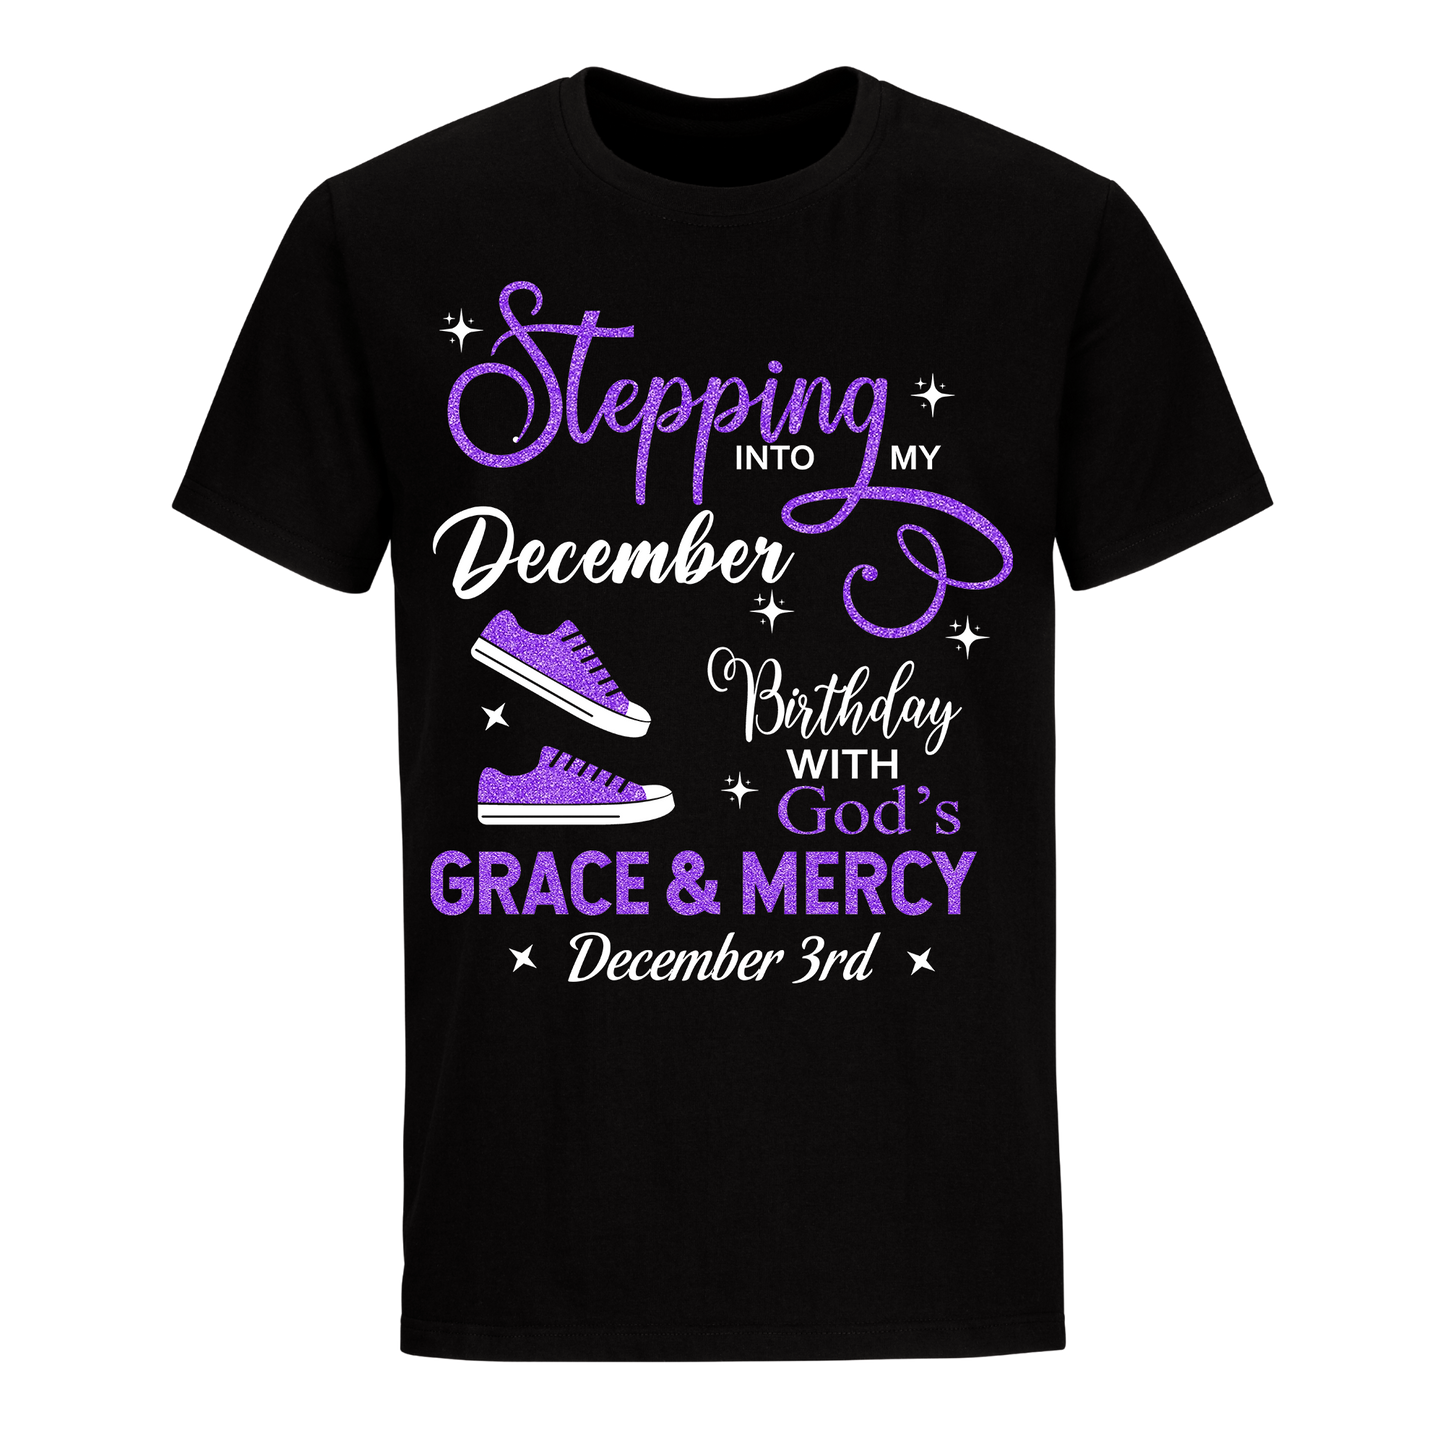 DECEMBER 03 GRACE AND MERCY